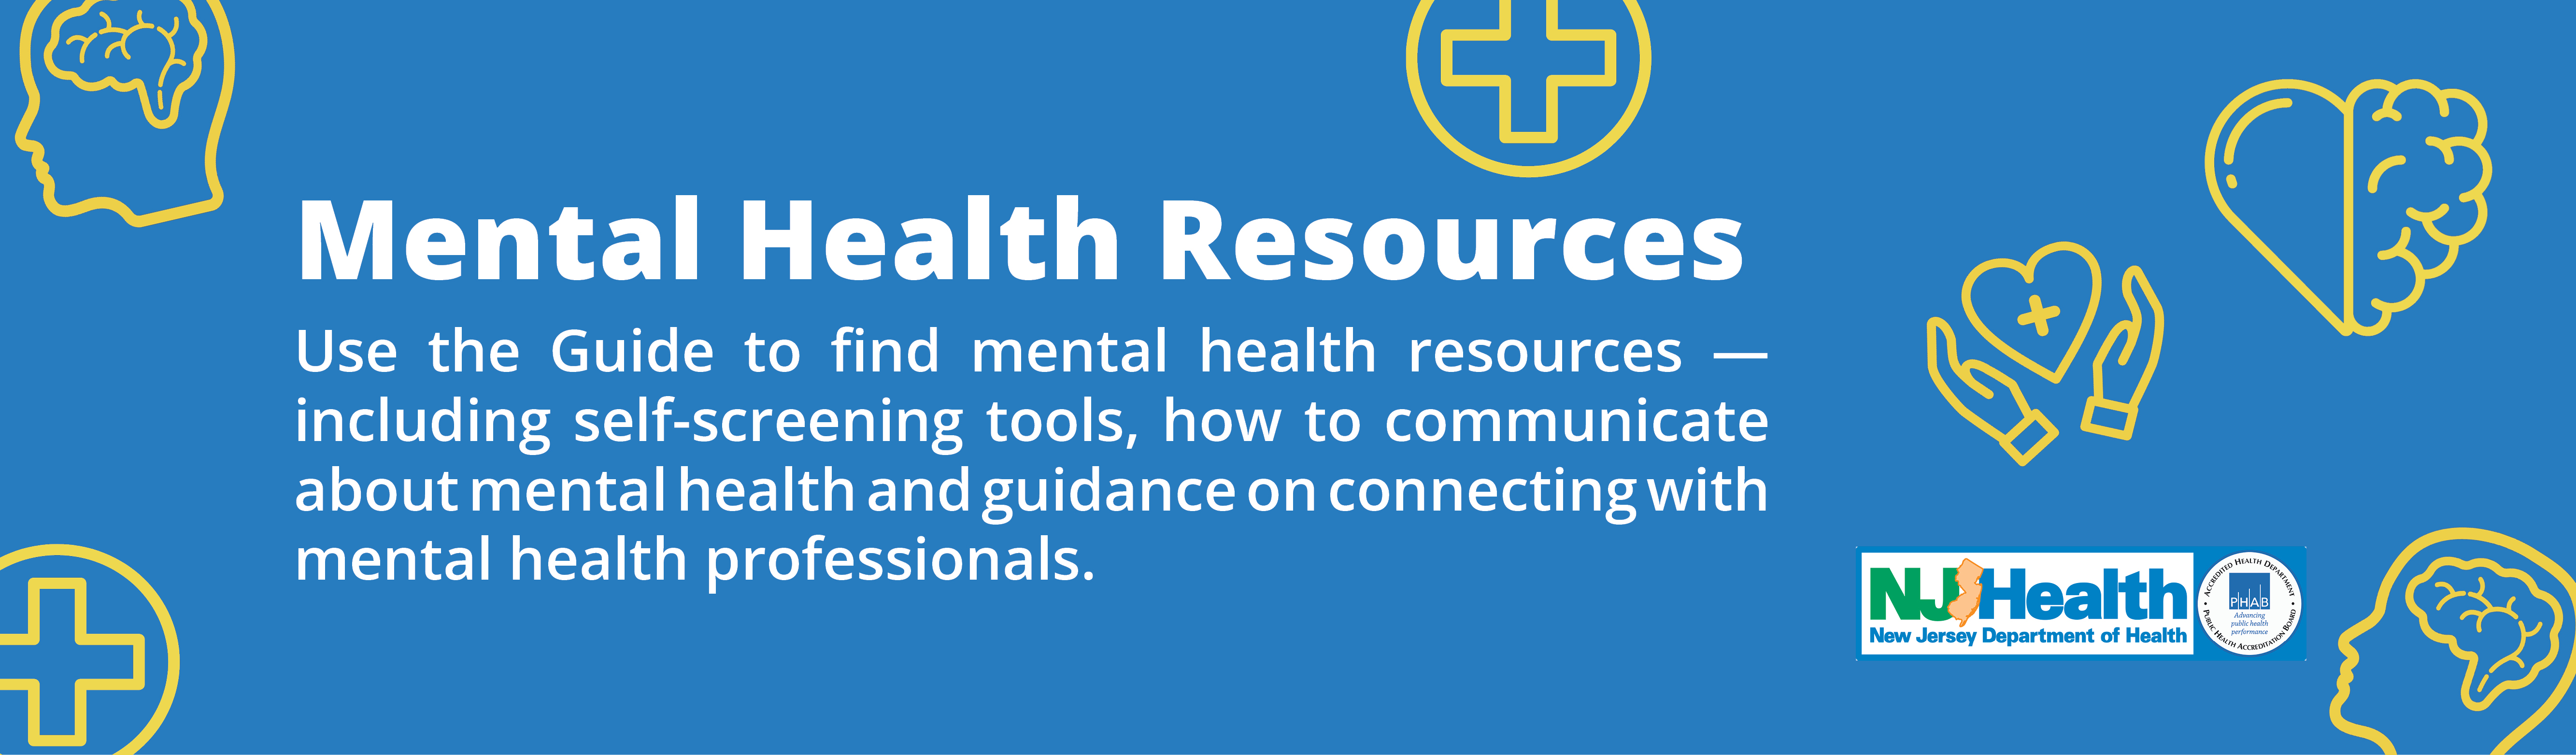 Mental Health Resources: Use the guide to find mental health resources - including self-screening tools, how to communicate about mental health and guidance on connecting with mental health professionals.